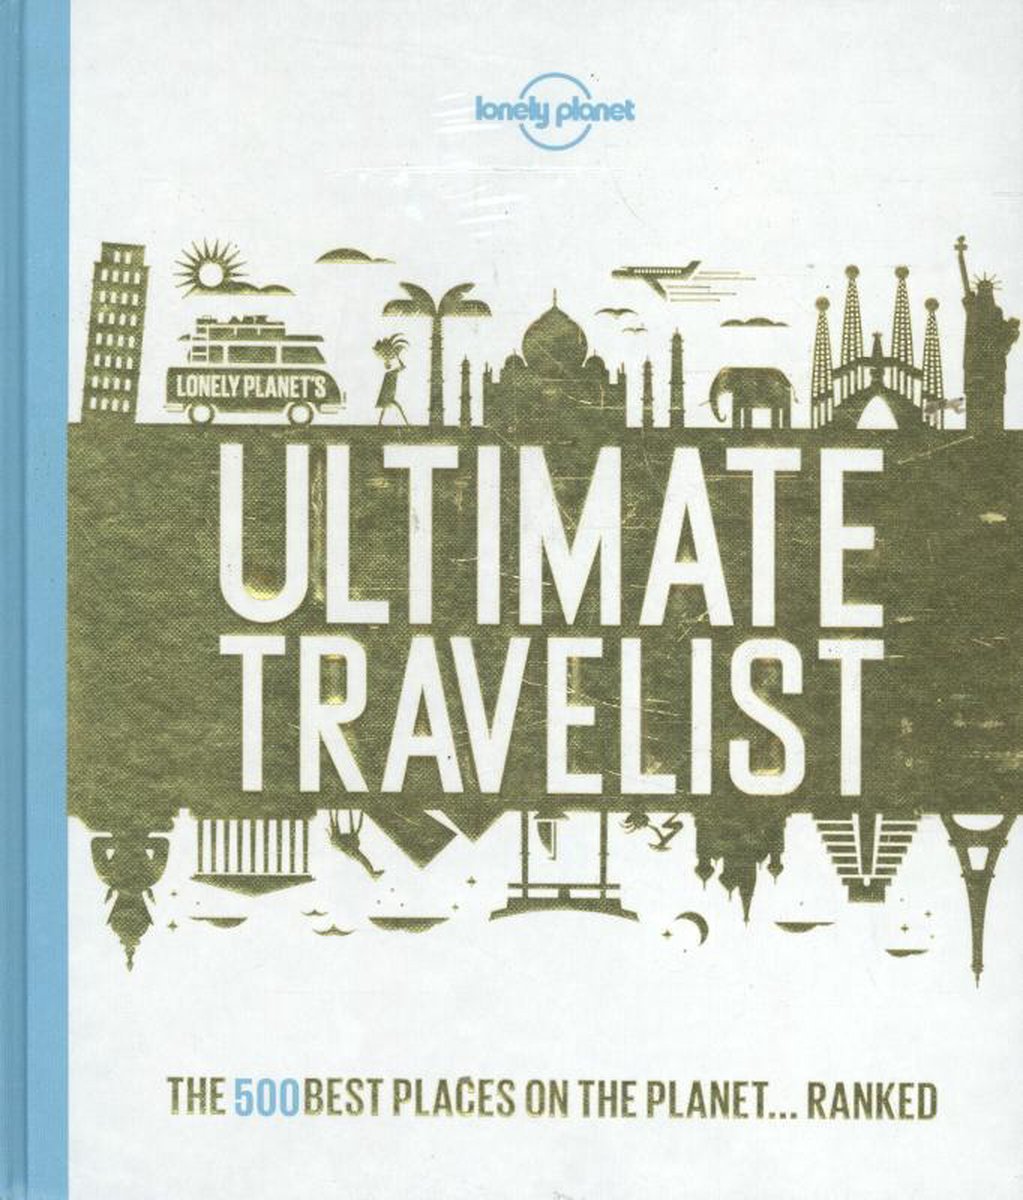 Lonely Planet: Ultimate Travelist (1st Ed) - Lonely Planet